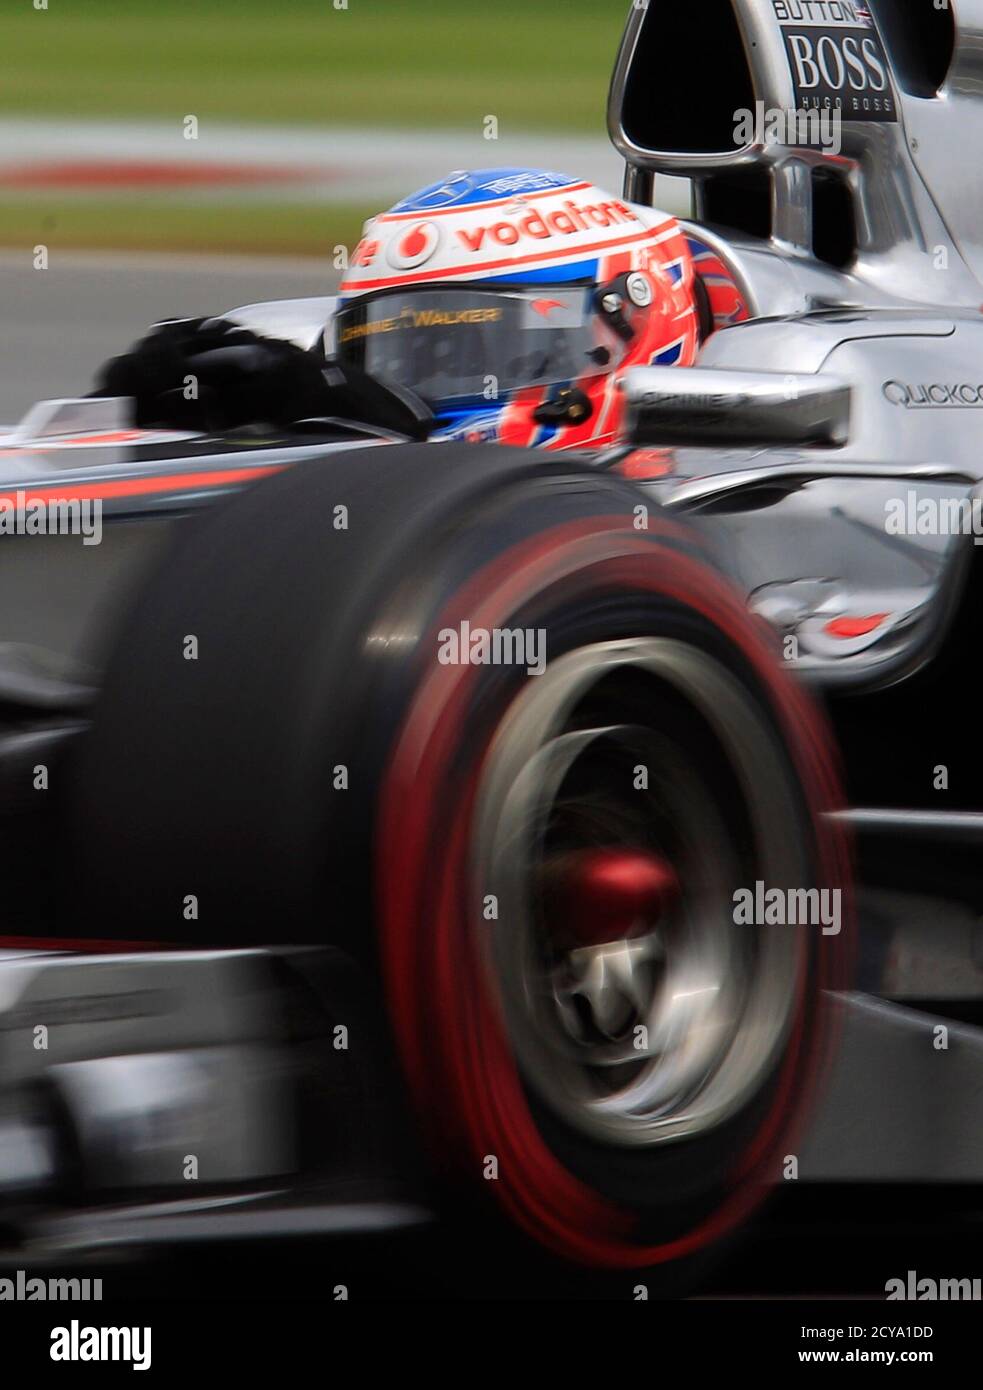 McLaren Formula One driver Jenson Button of Britain drives during the third practice session of the Canadian F1 Grand Prix at the Circuit Gilles Villeneuve in Montreal June 11, 2011.  REUTERS/Chris Wattie (CANADA  - Tags: SPORT MOTOR RACING) Stock Photo